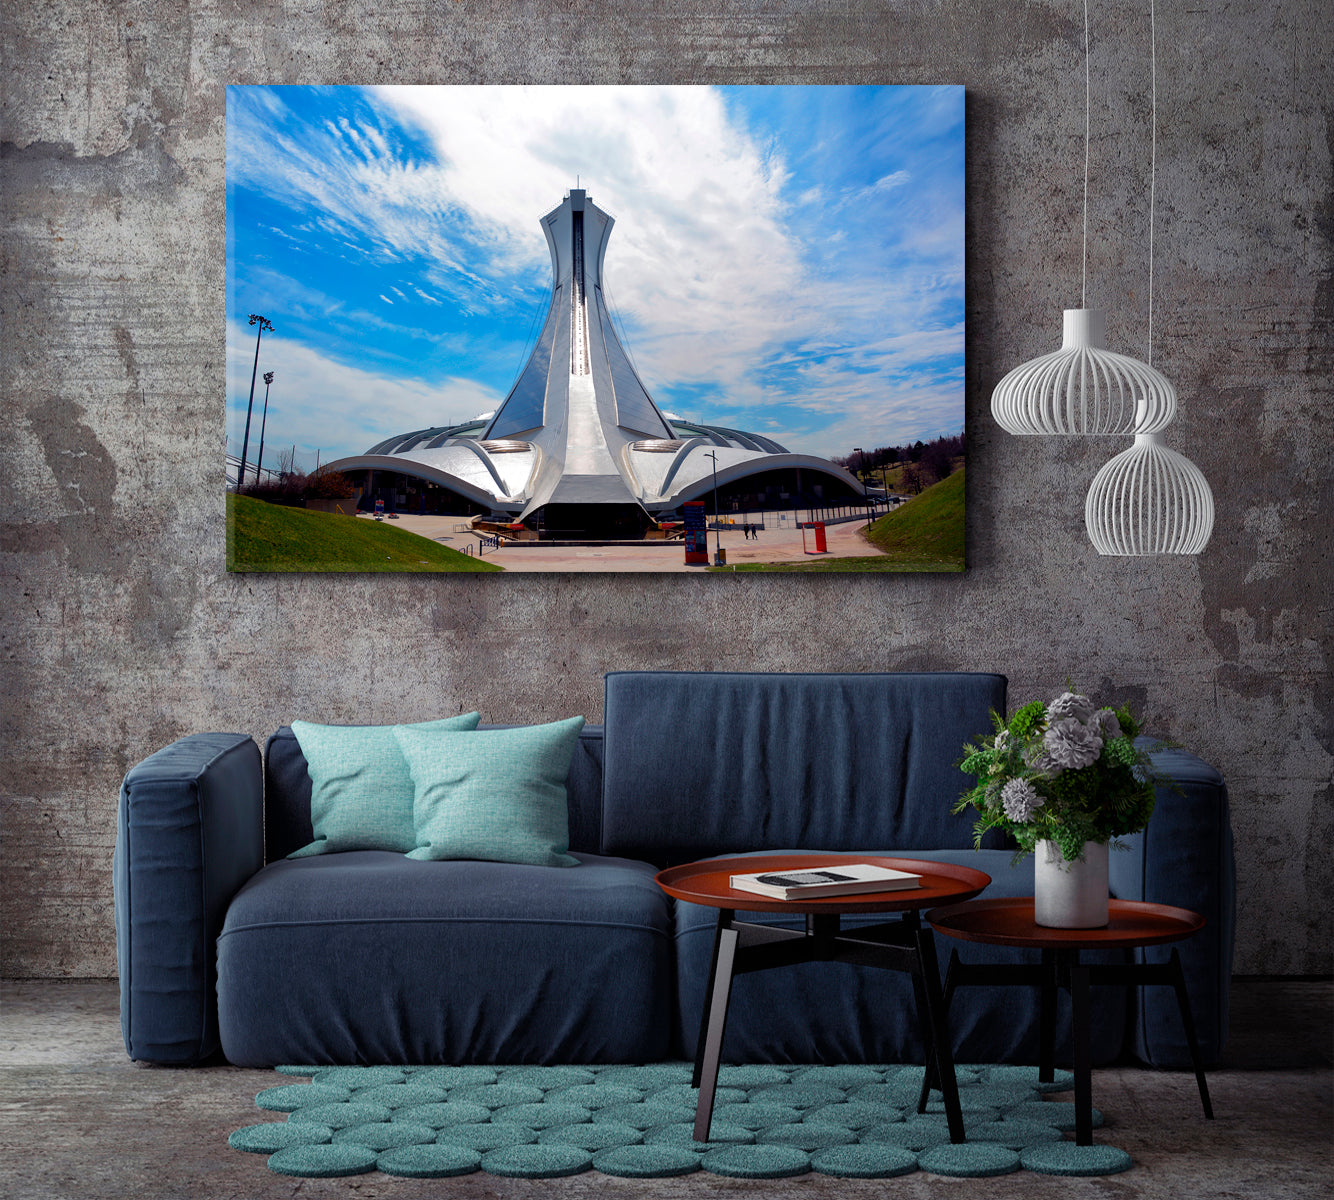 Montreal Olympic Stadium and Tower Famous Landmarks Artwork Print Artesty   